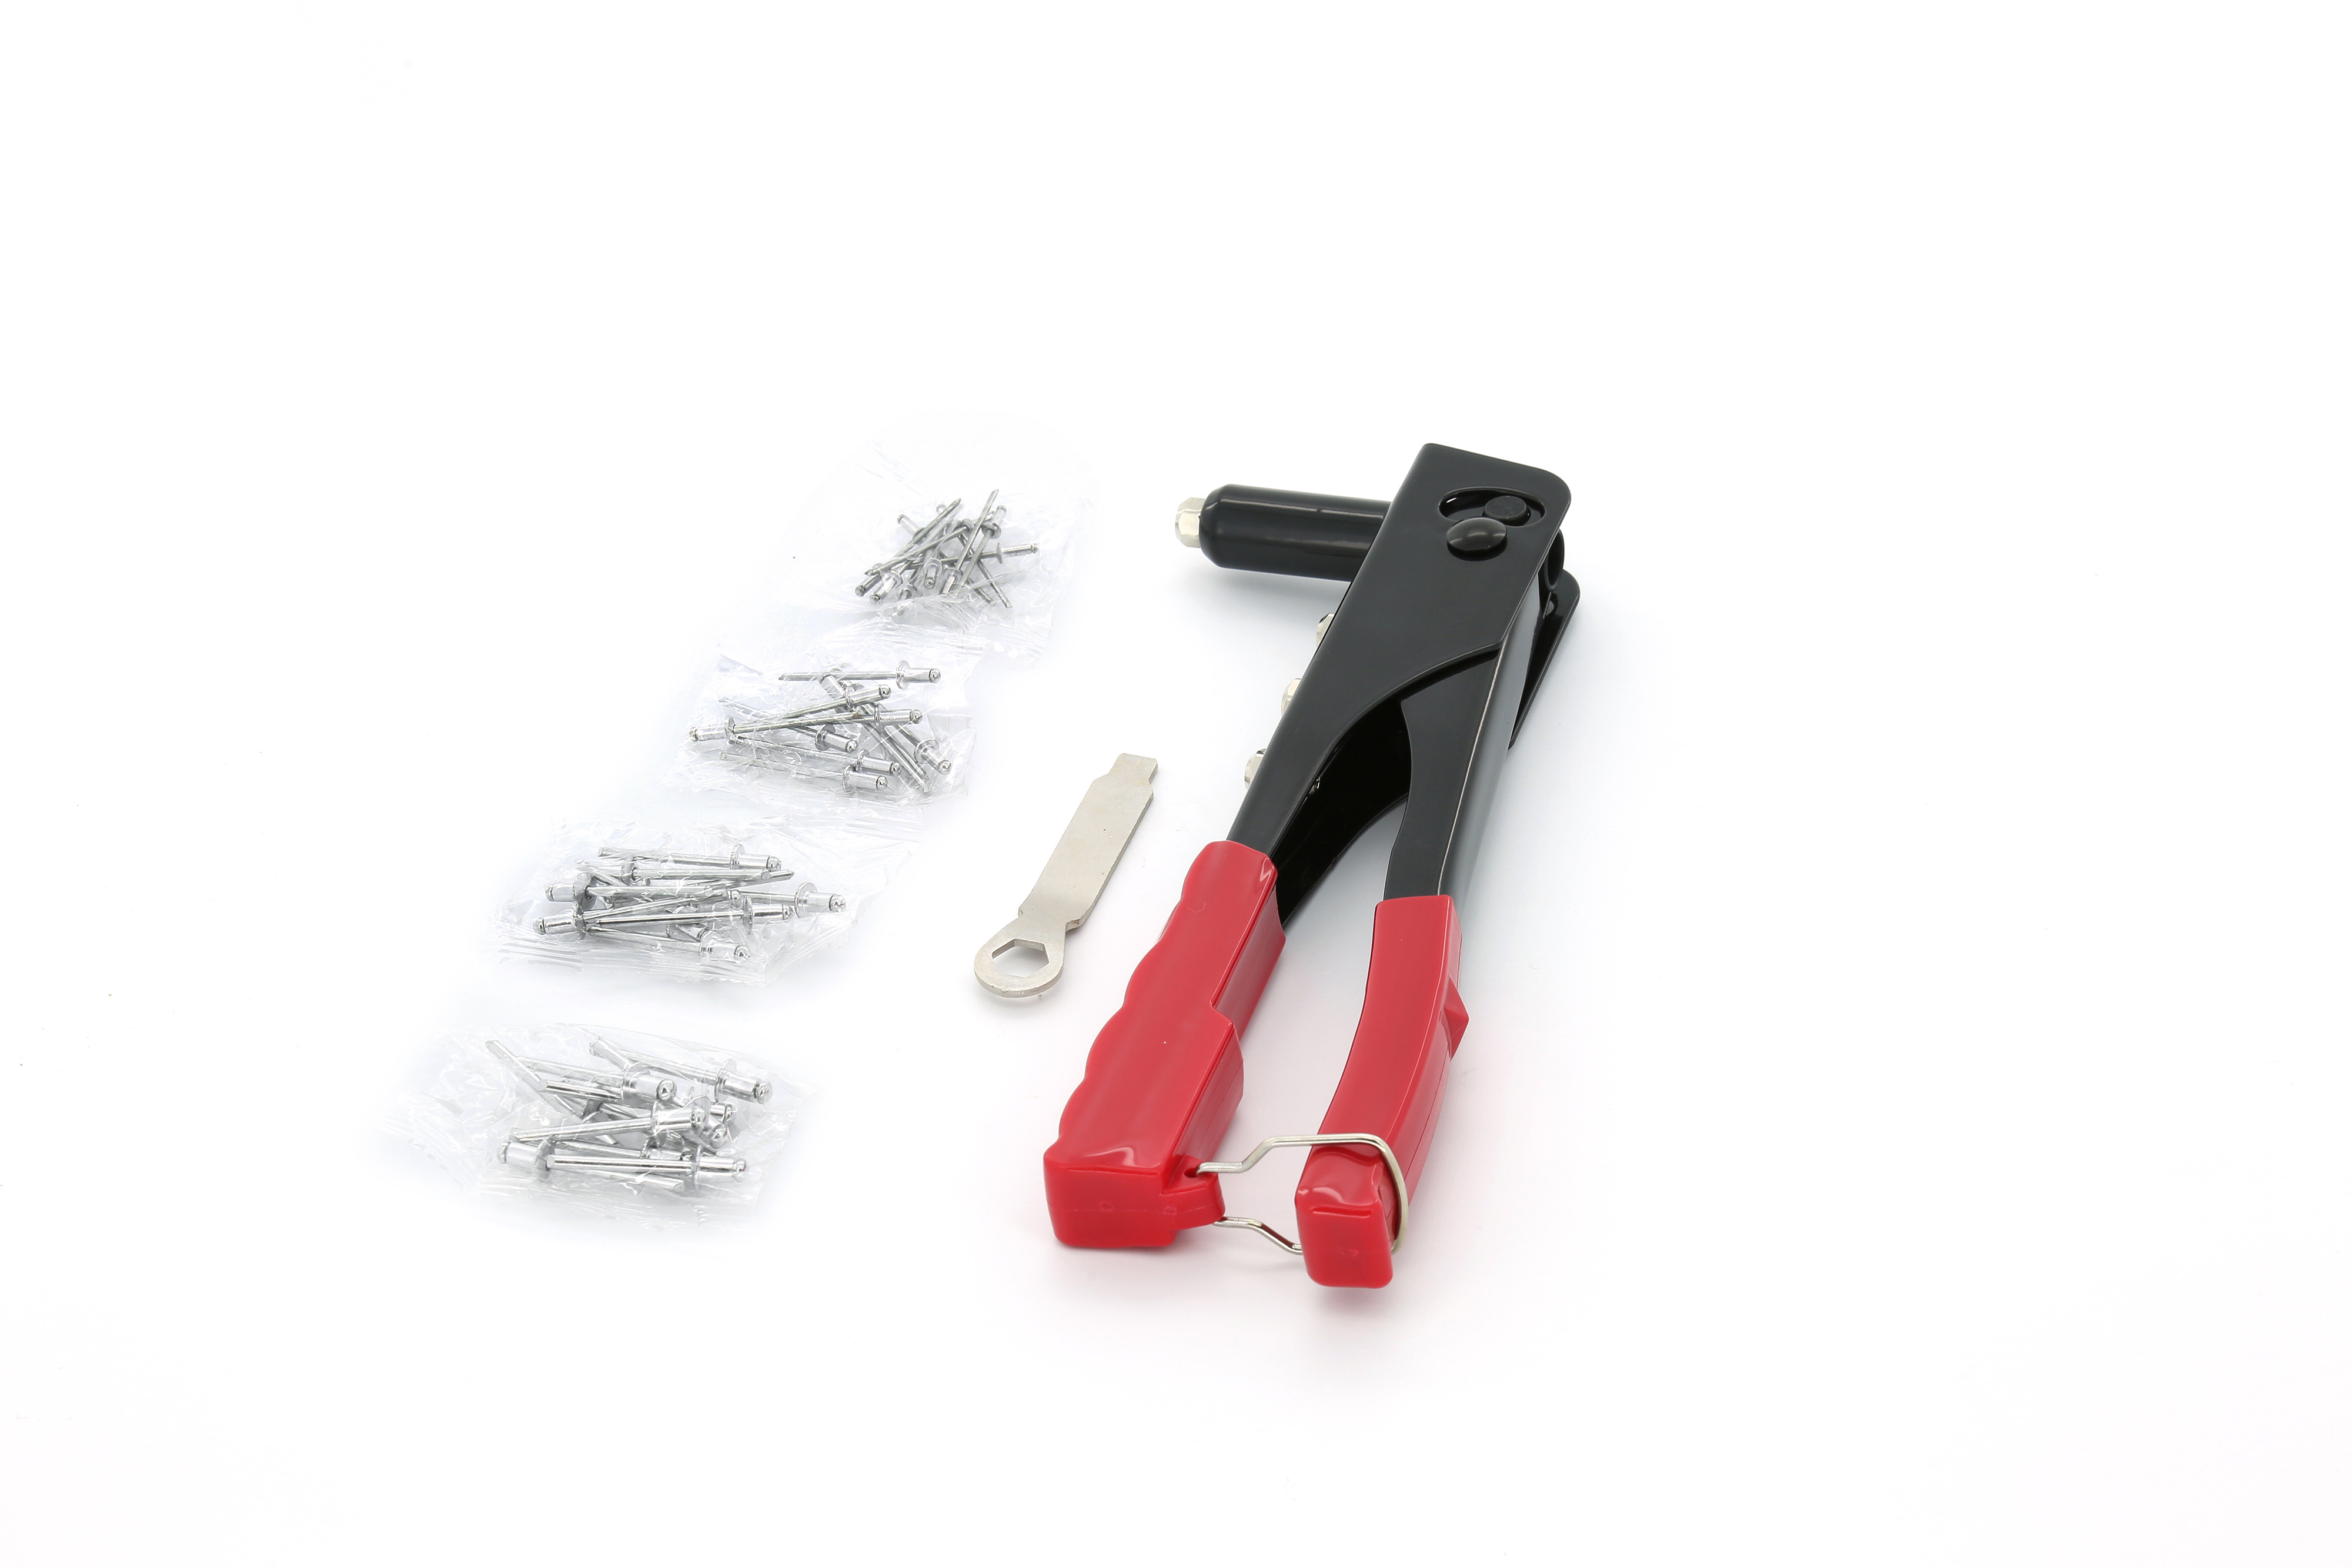 Hyper Tough 9.5 inch Rivet Tool with 40 Assorted Rivets TN12556J, Black and  Red